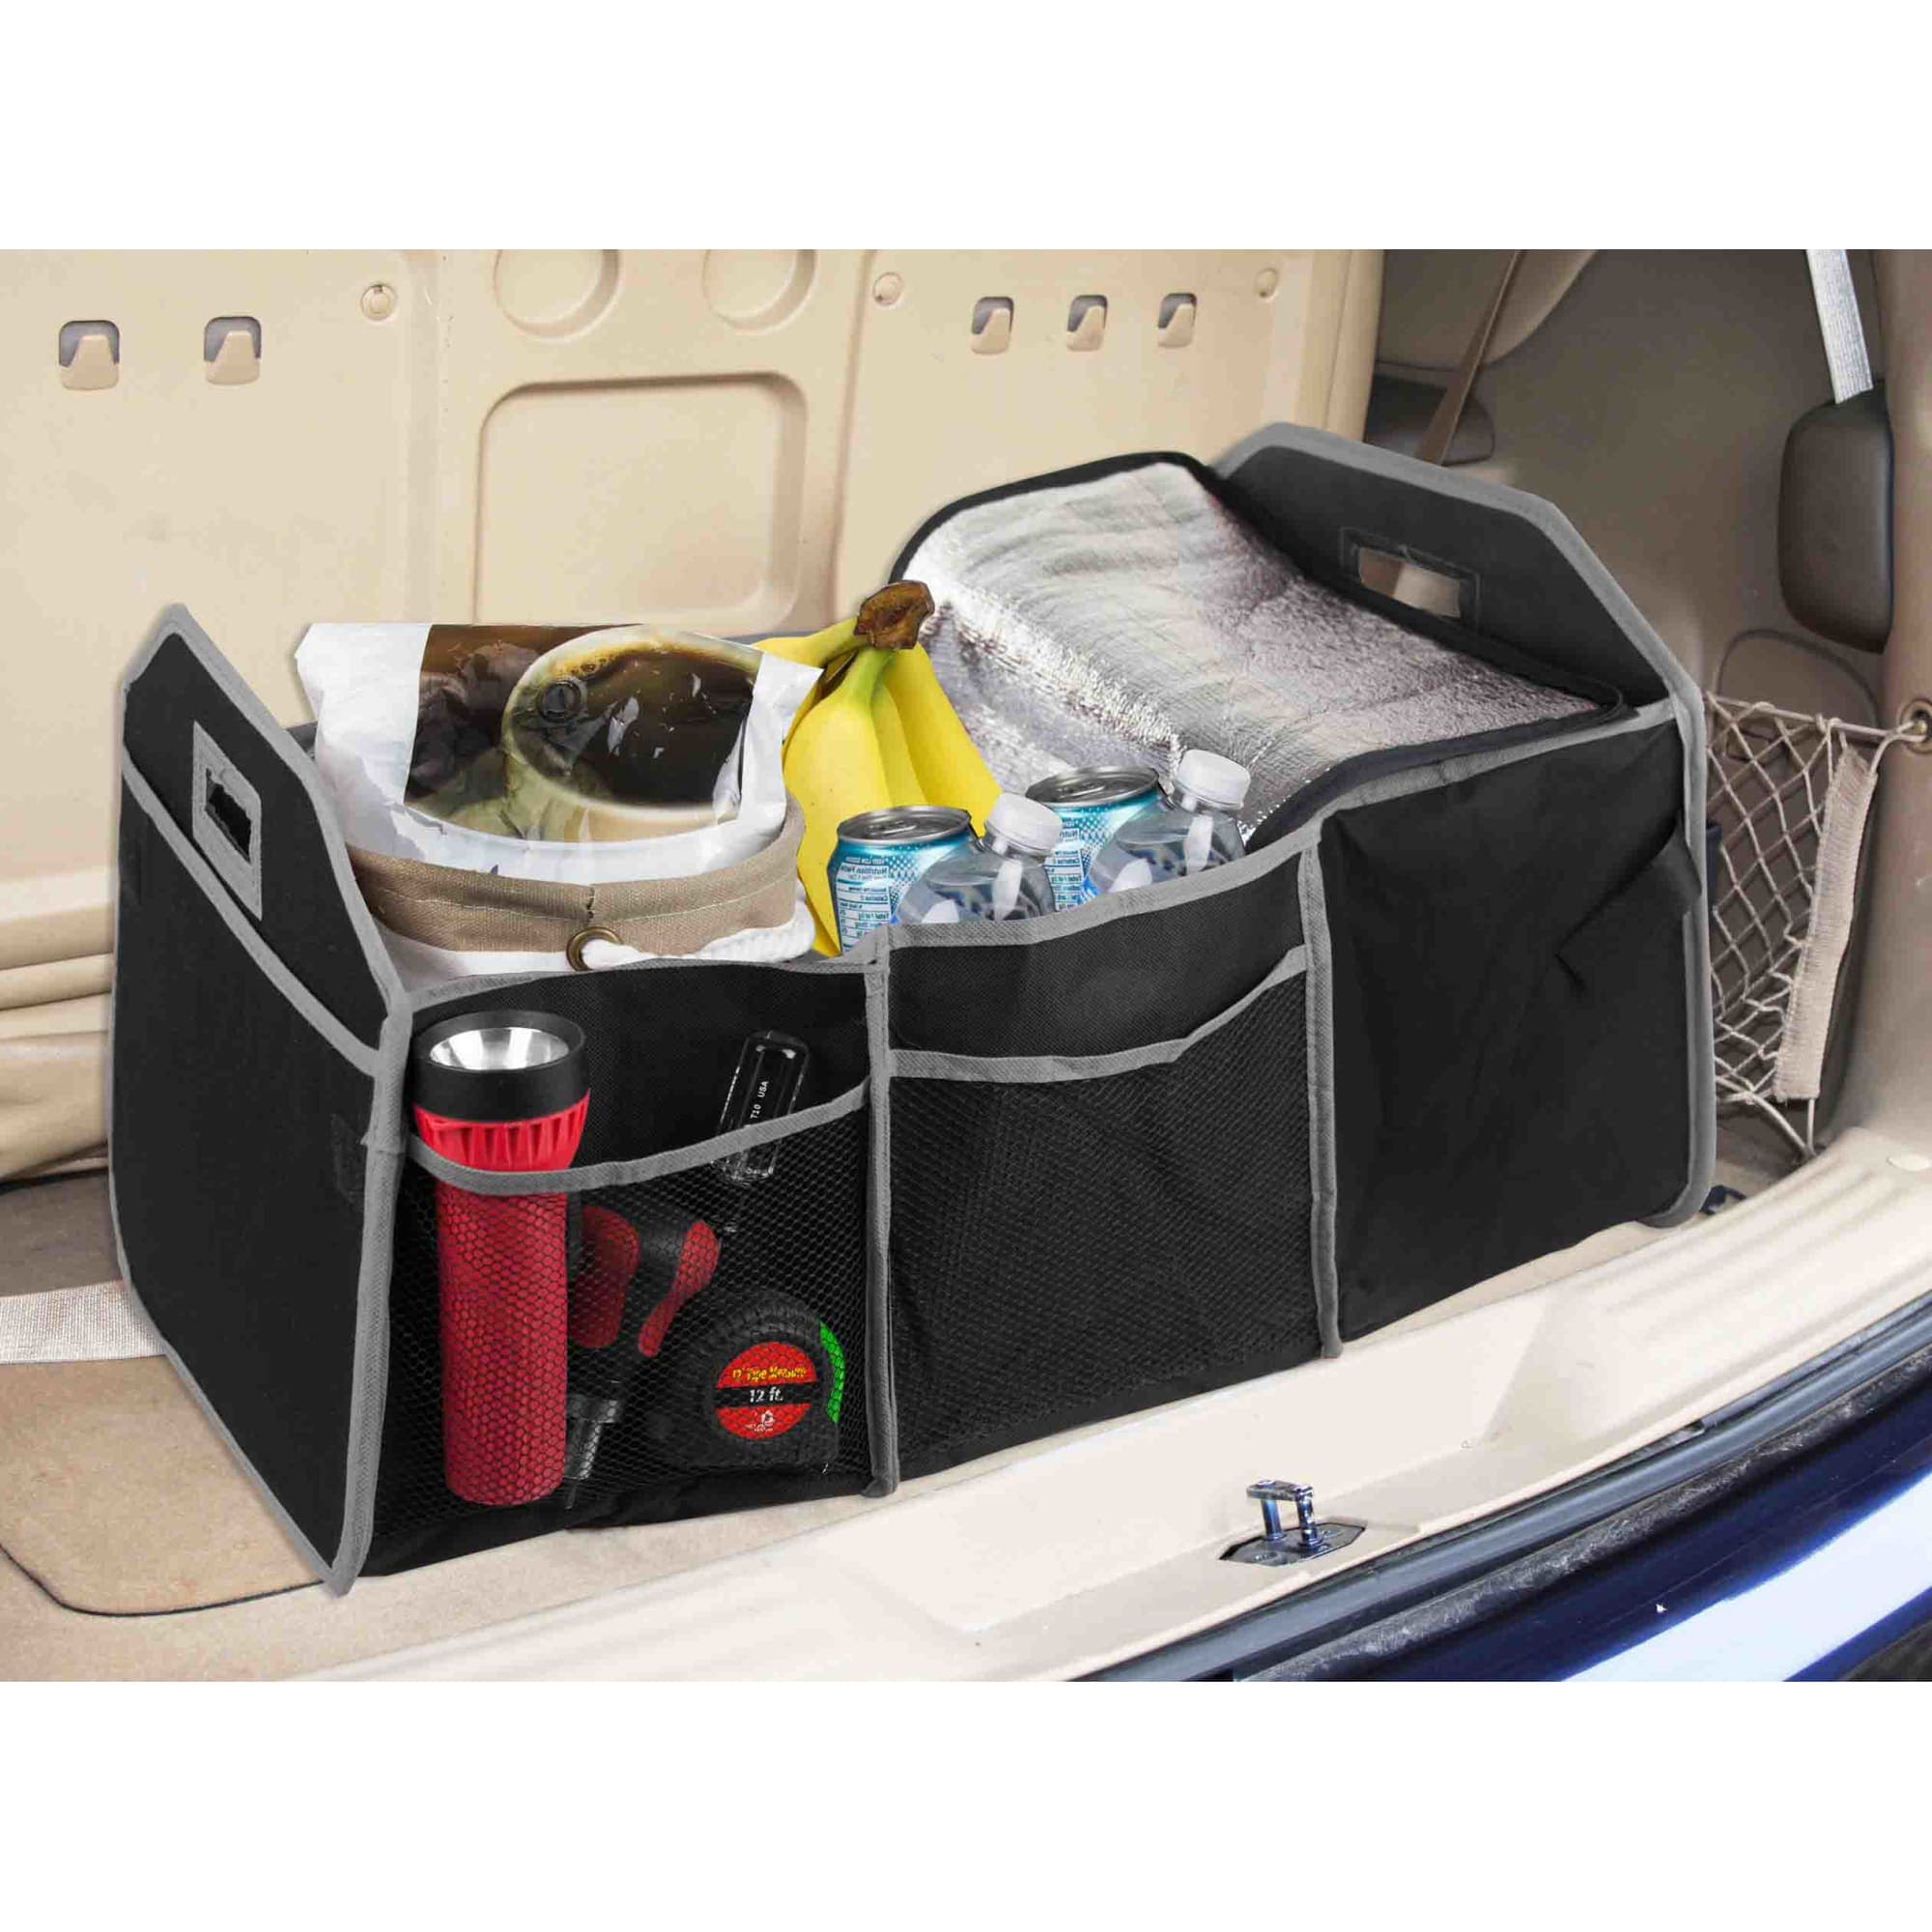 Home Basics Collapsible and Foldable Cargo Trunk Organizer with Cooler, Black $8 EACH, CASE PACK OF 6